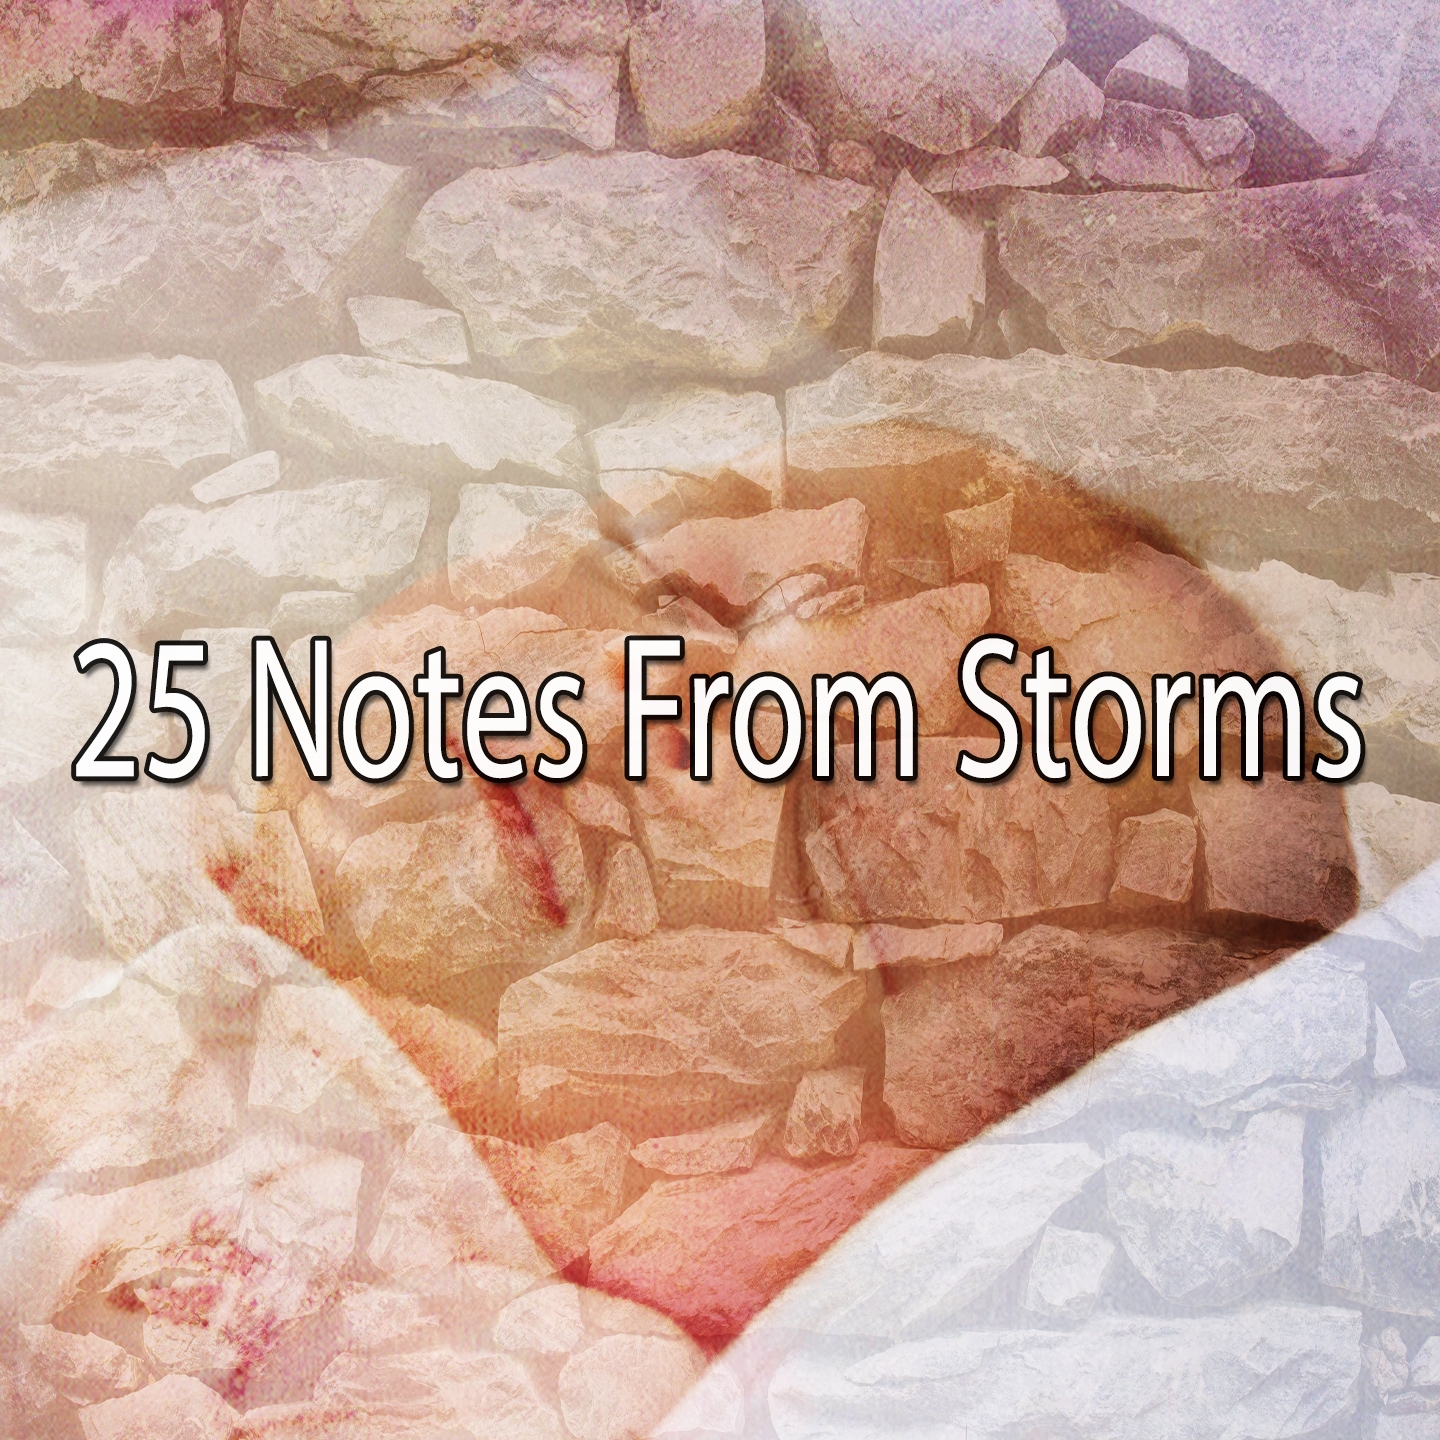 25 Notes From Storms